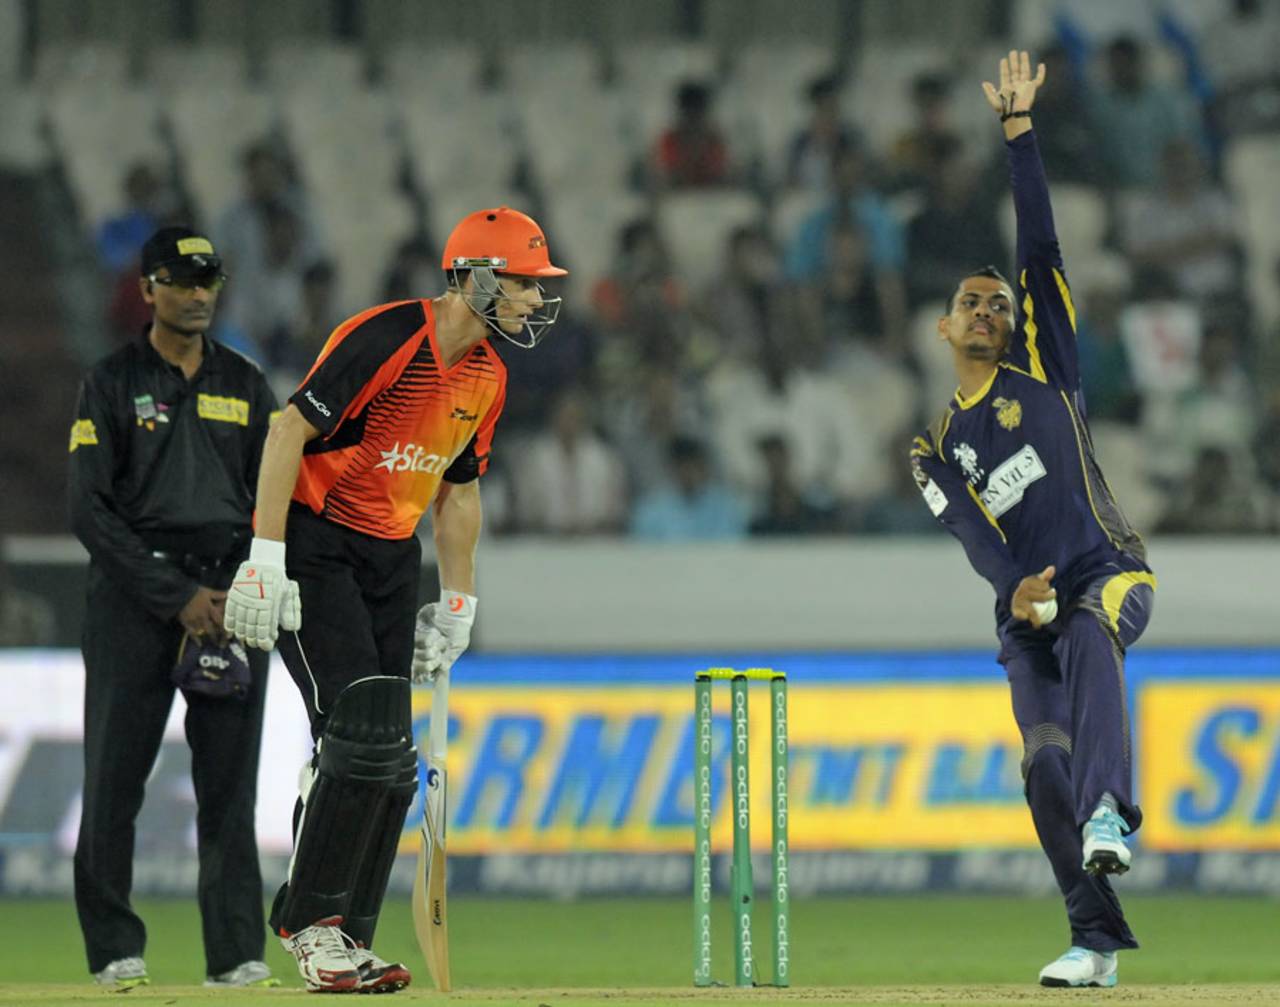 It's best that the necessary modifications to Sunil Narine's bowling action are made as quickly as possible&nbsp;&nbsp;&bull;&nbsp;&nbsp;BCCI